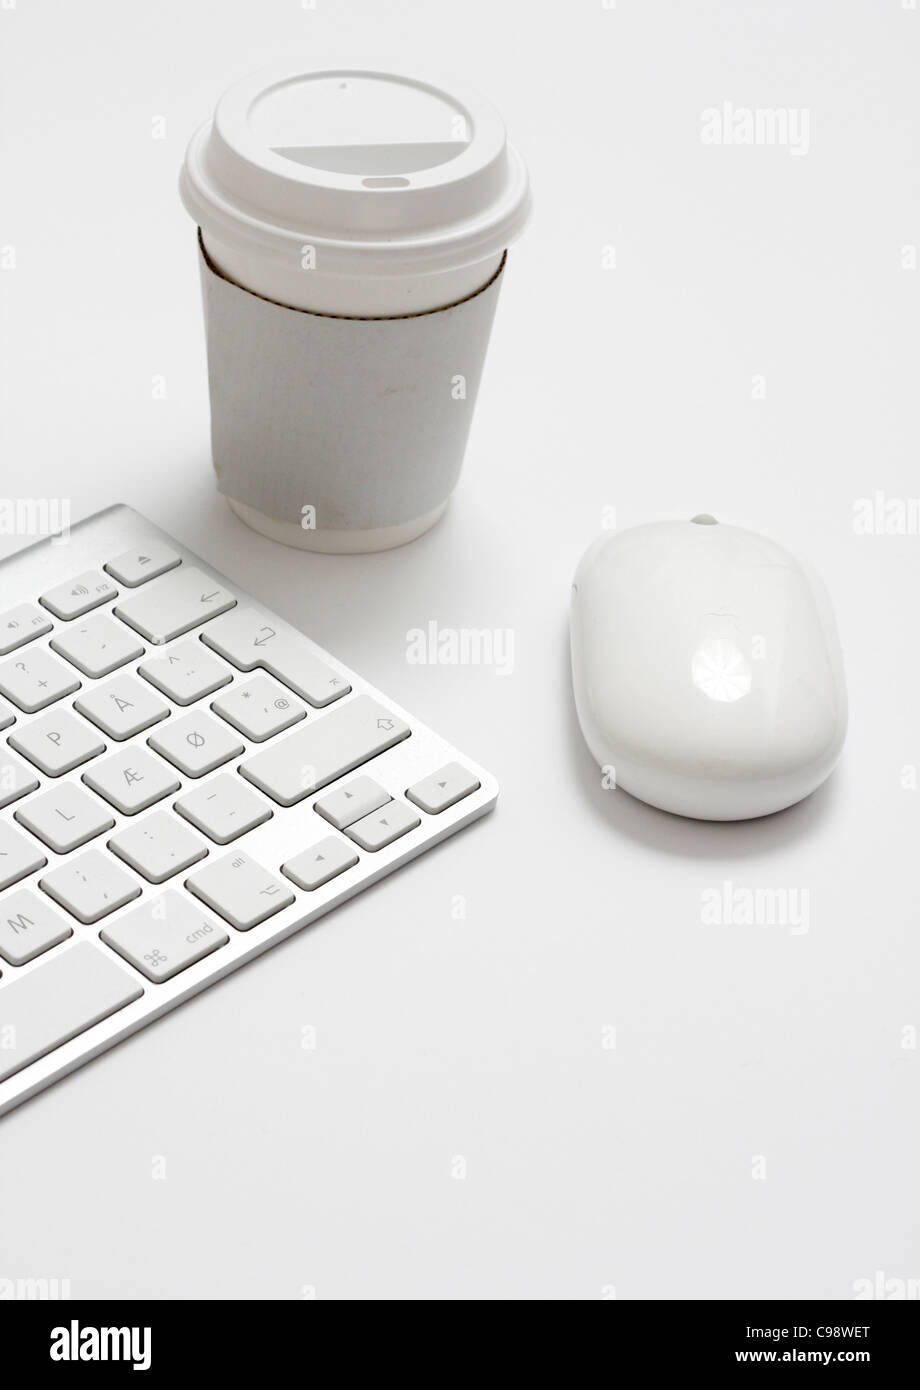 Mouse and keyboard and take away coffee Stock Photo